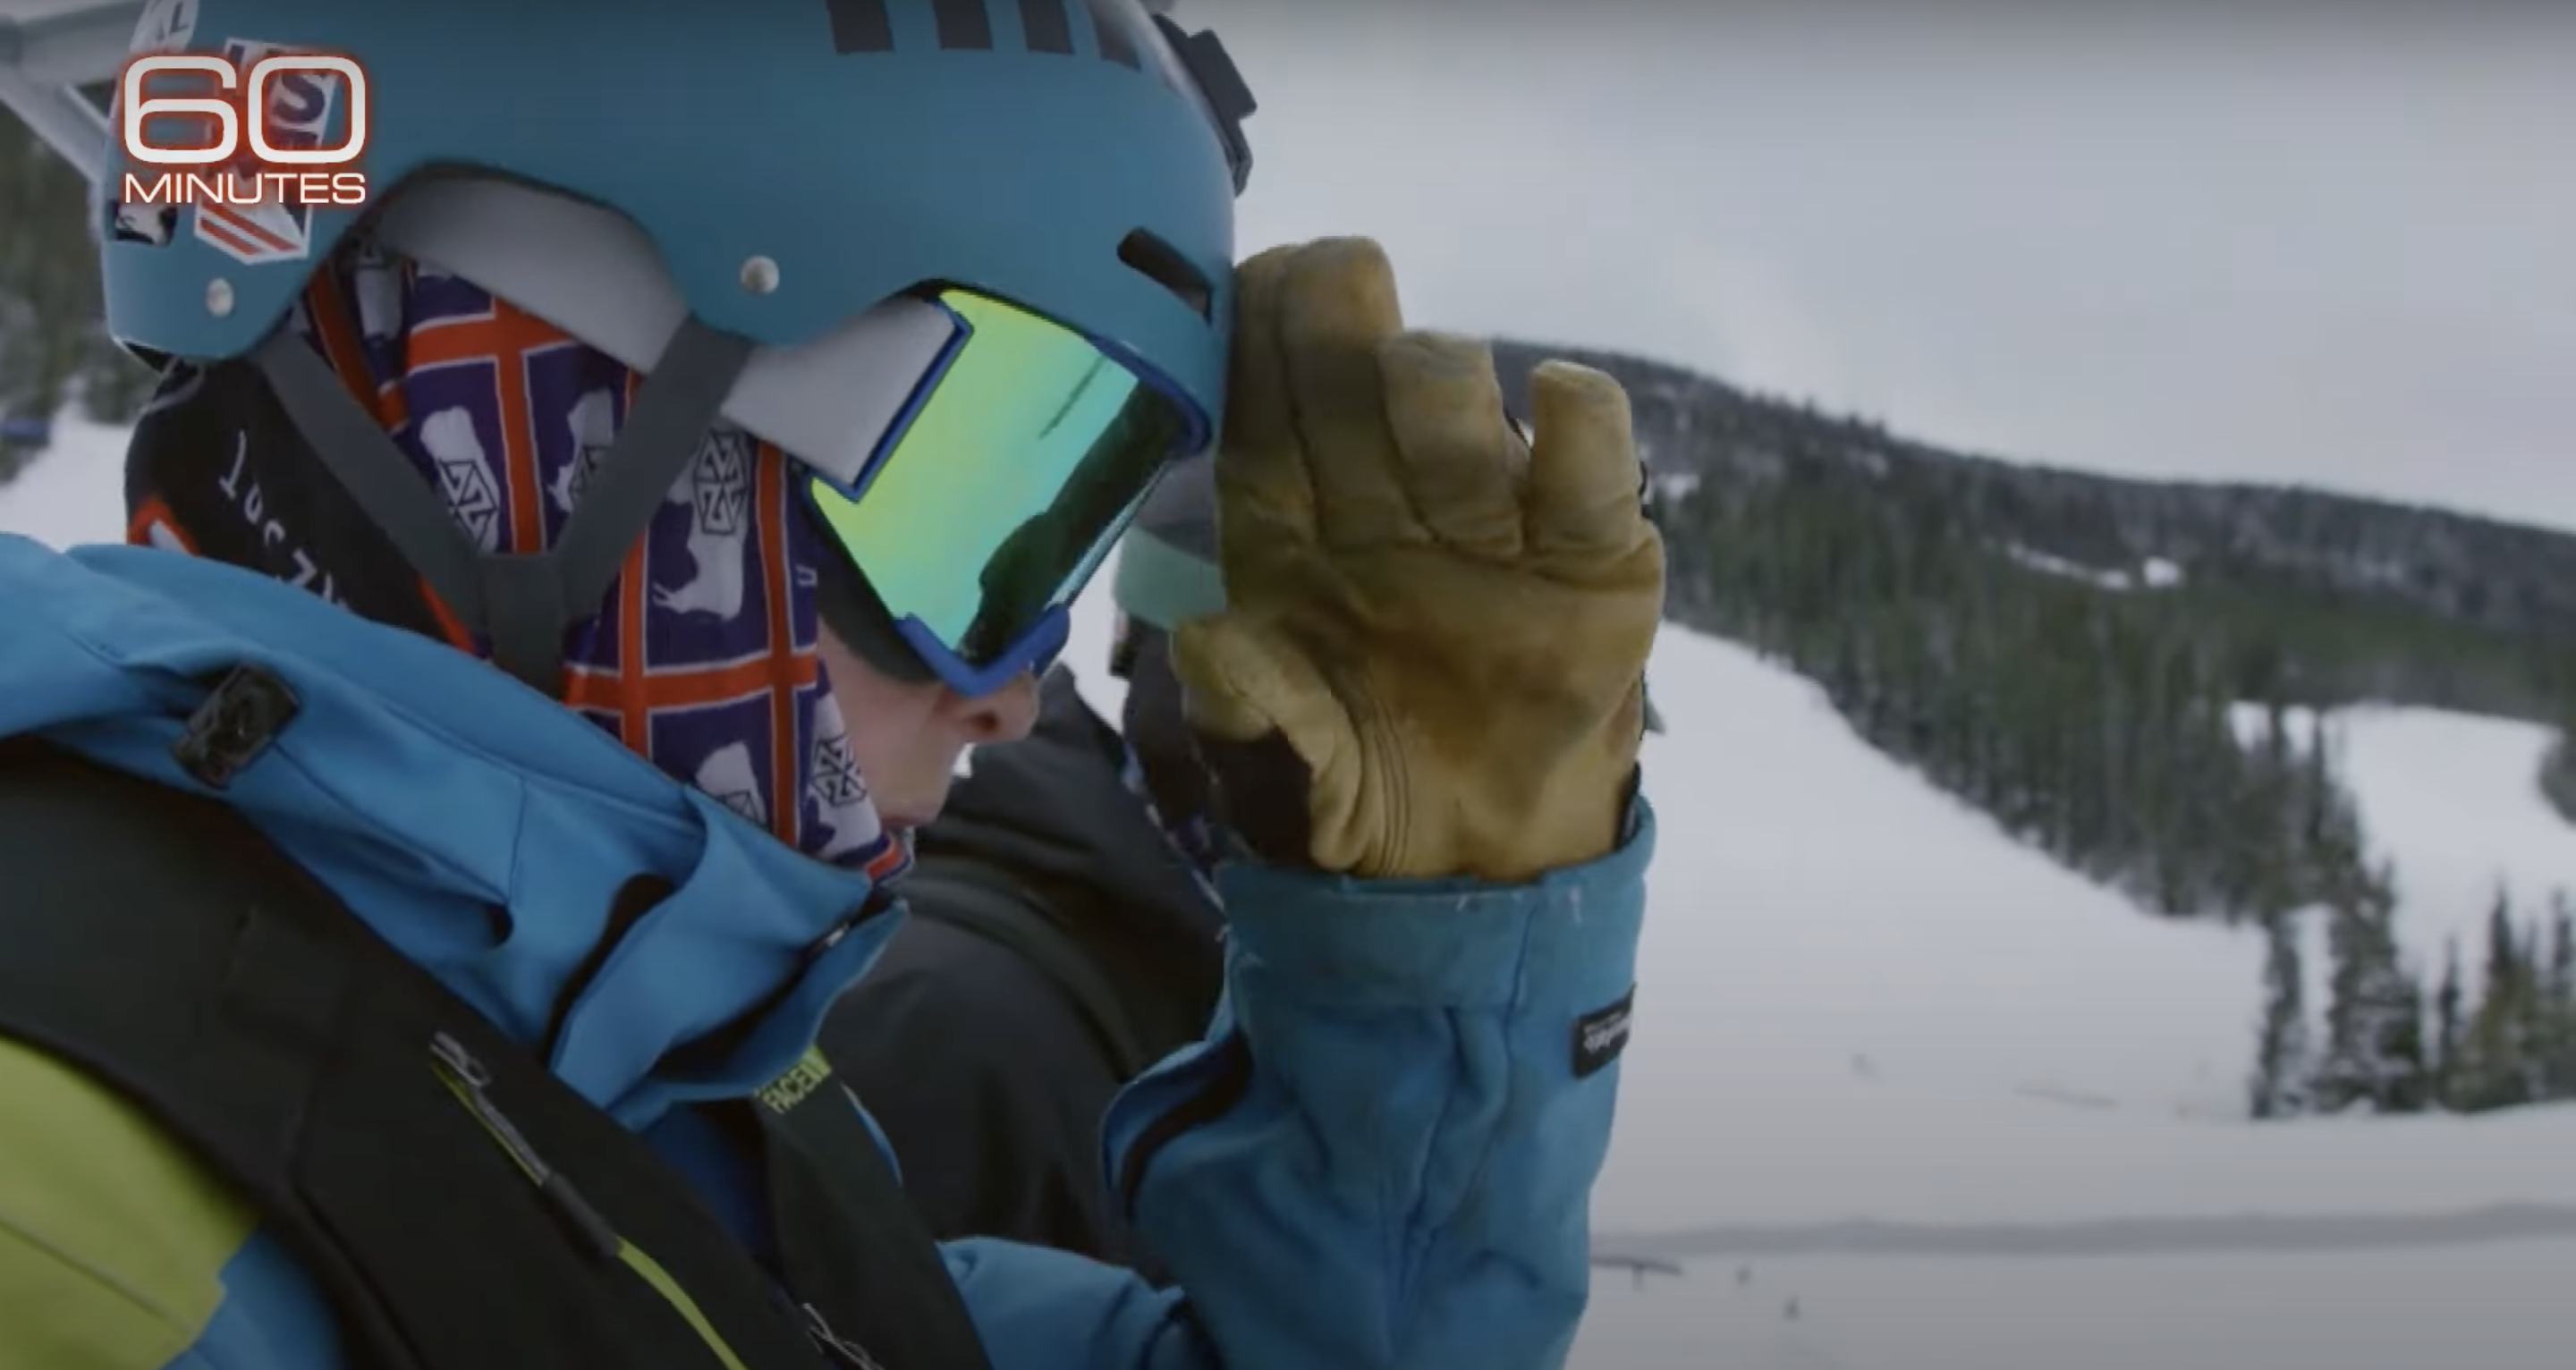 VIDEO: This 15-Year-Old Legally Blind Skier Competes In Freeride Competitions